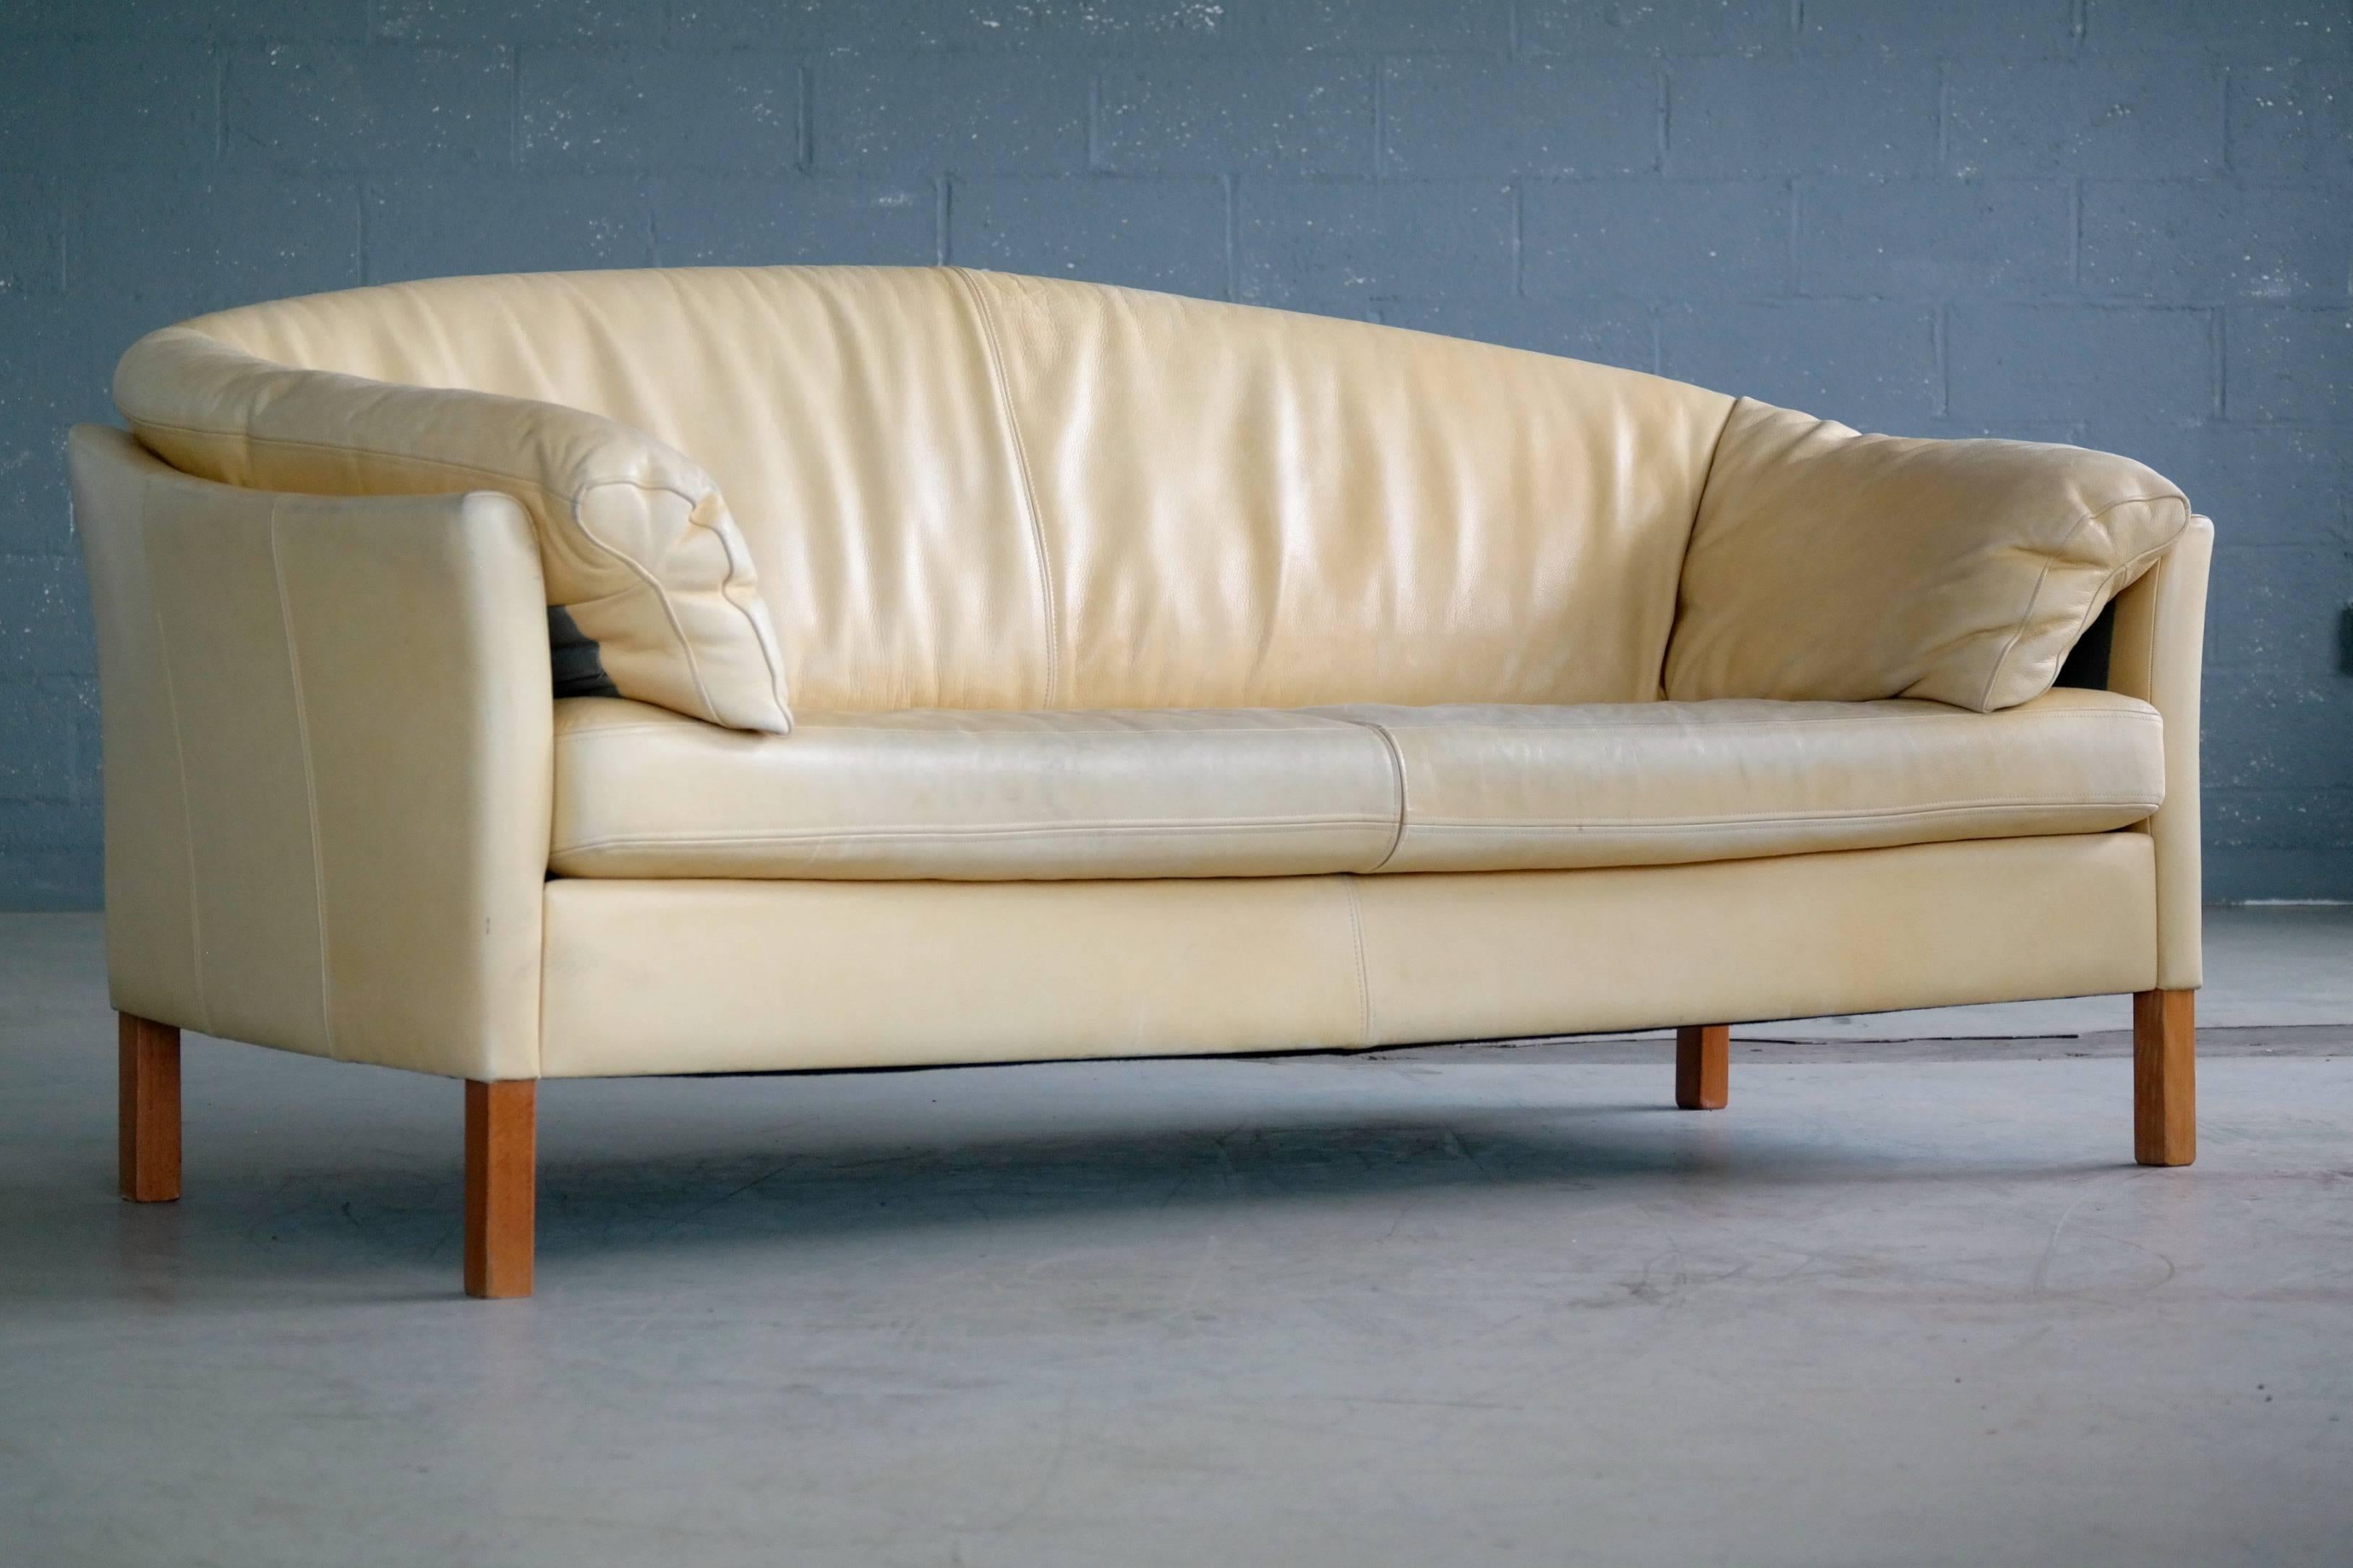 Very plush and classically styled three-seat sofa model MH535 made by Mogens Hansen in top grain aniline leather with beech wood legs. The sofa is a nice modern take on the banan form sofas of the 1940s and was designed around the late 1960s and